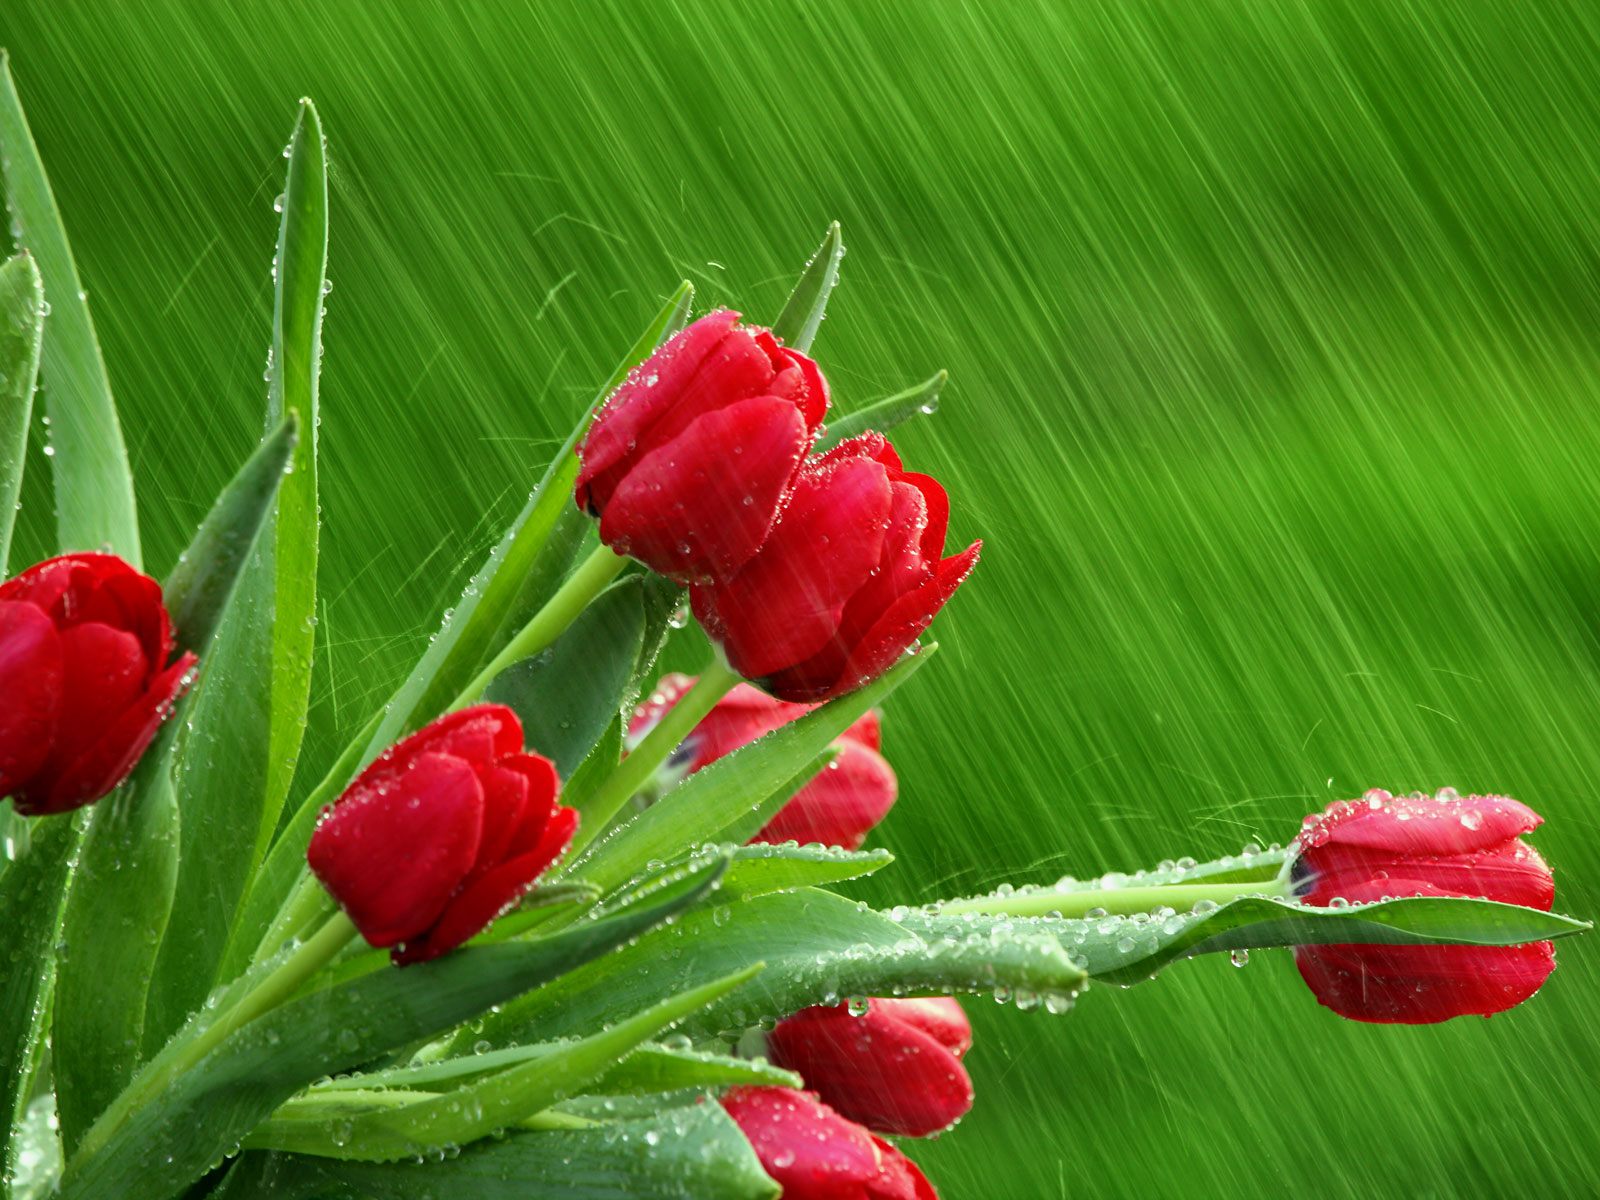 Paulbarford Heritage The Ruth Beautiful Rain Wallpaper For Your